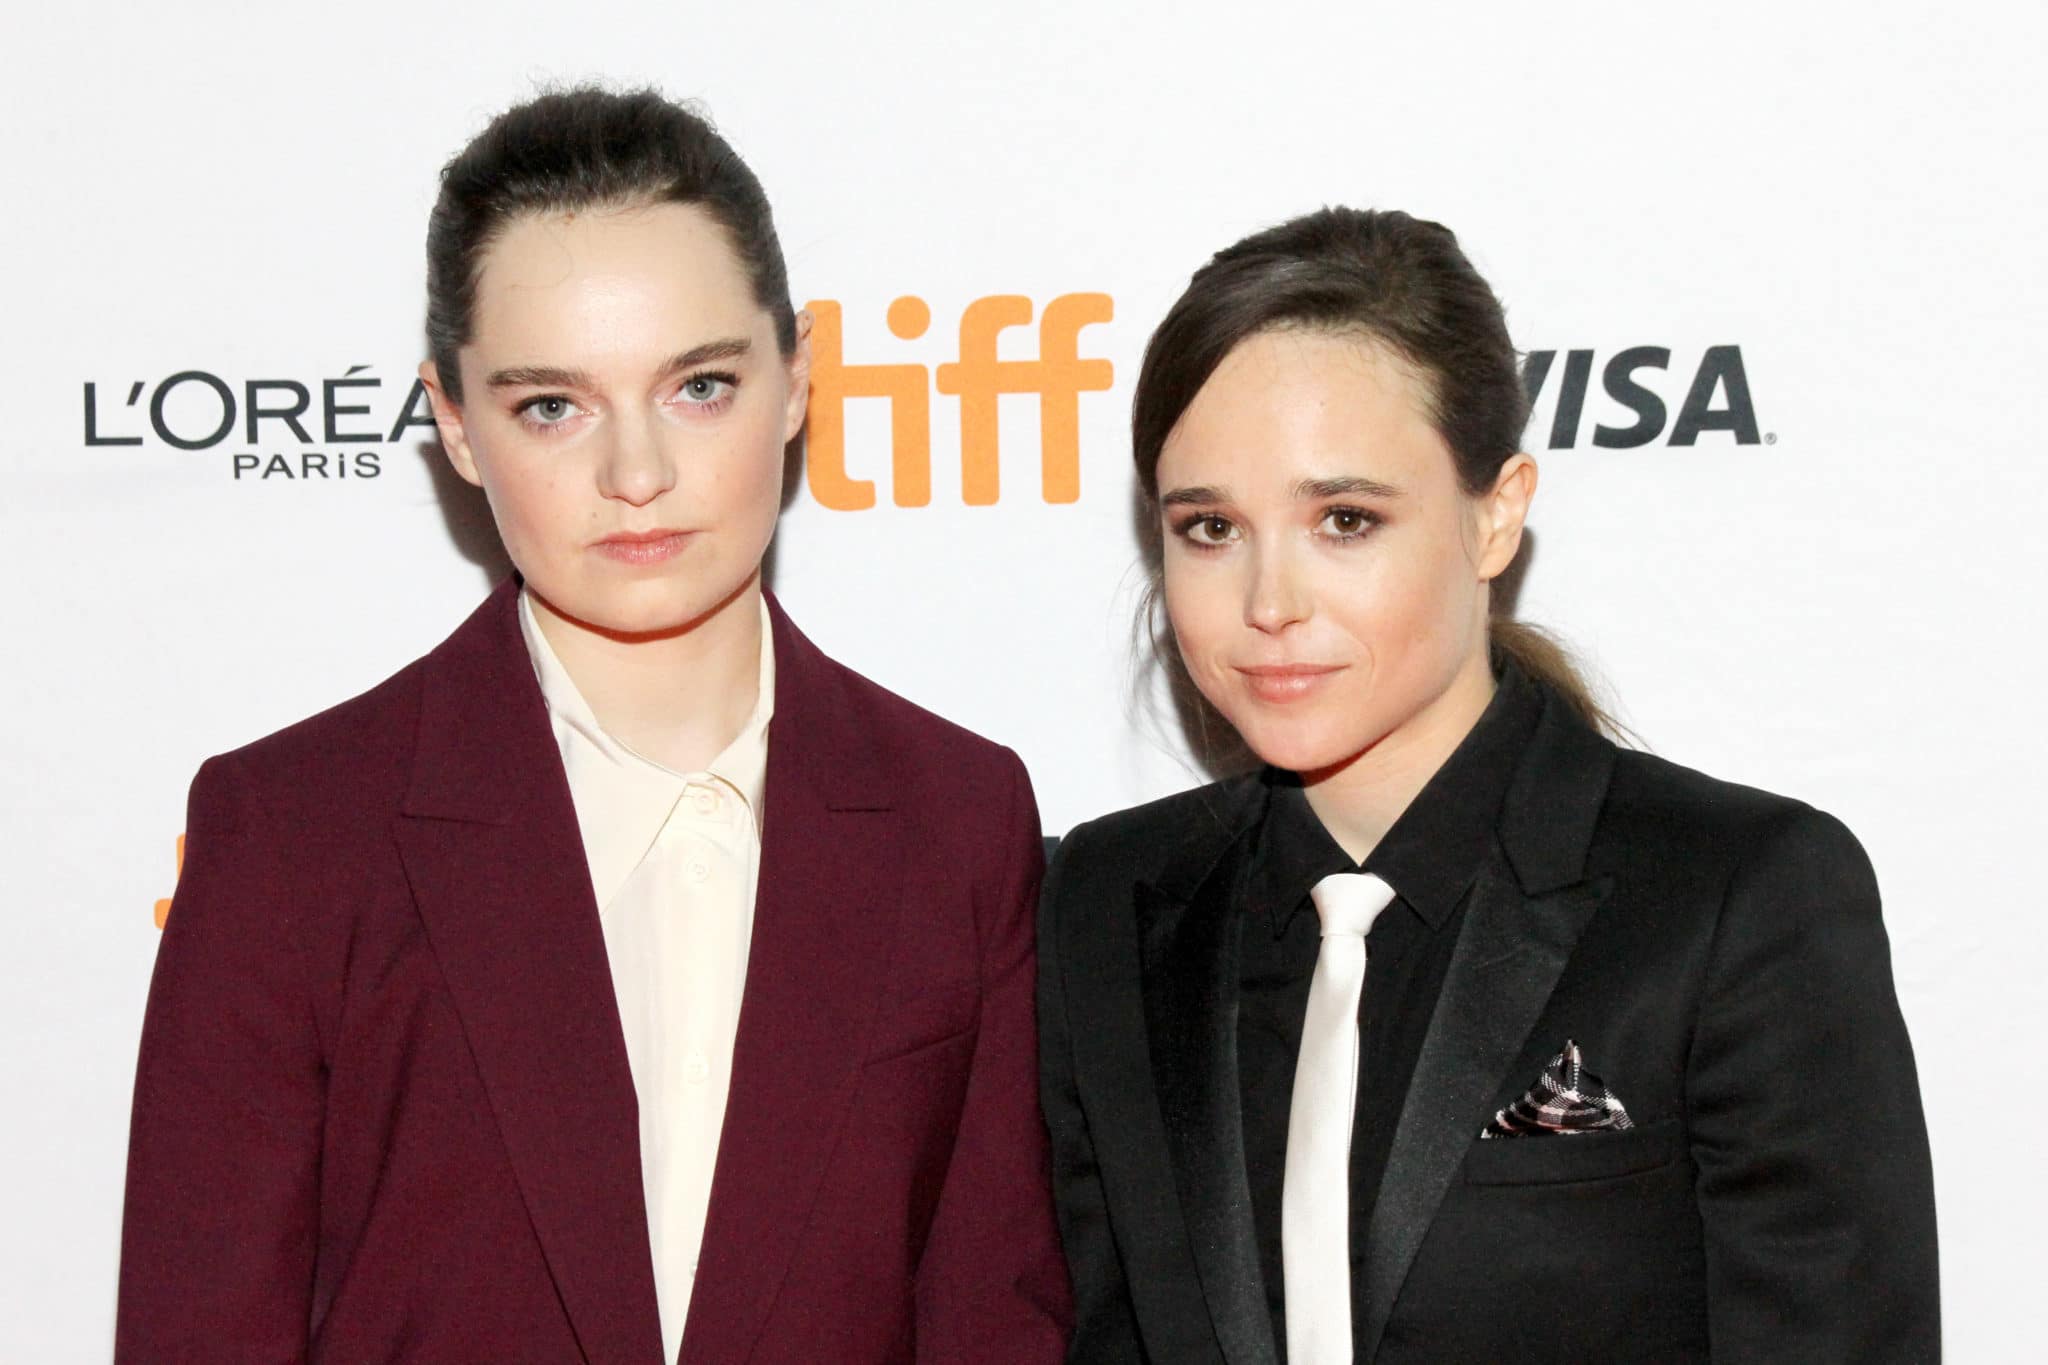 Emma Portner in a burgundy suit and Elliot Page in a black suit and white tie